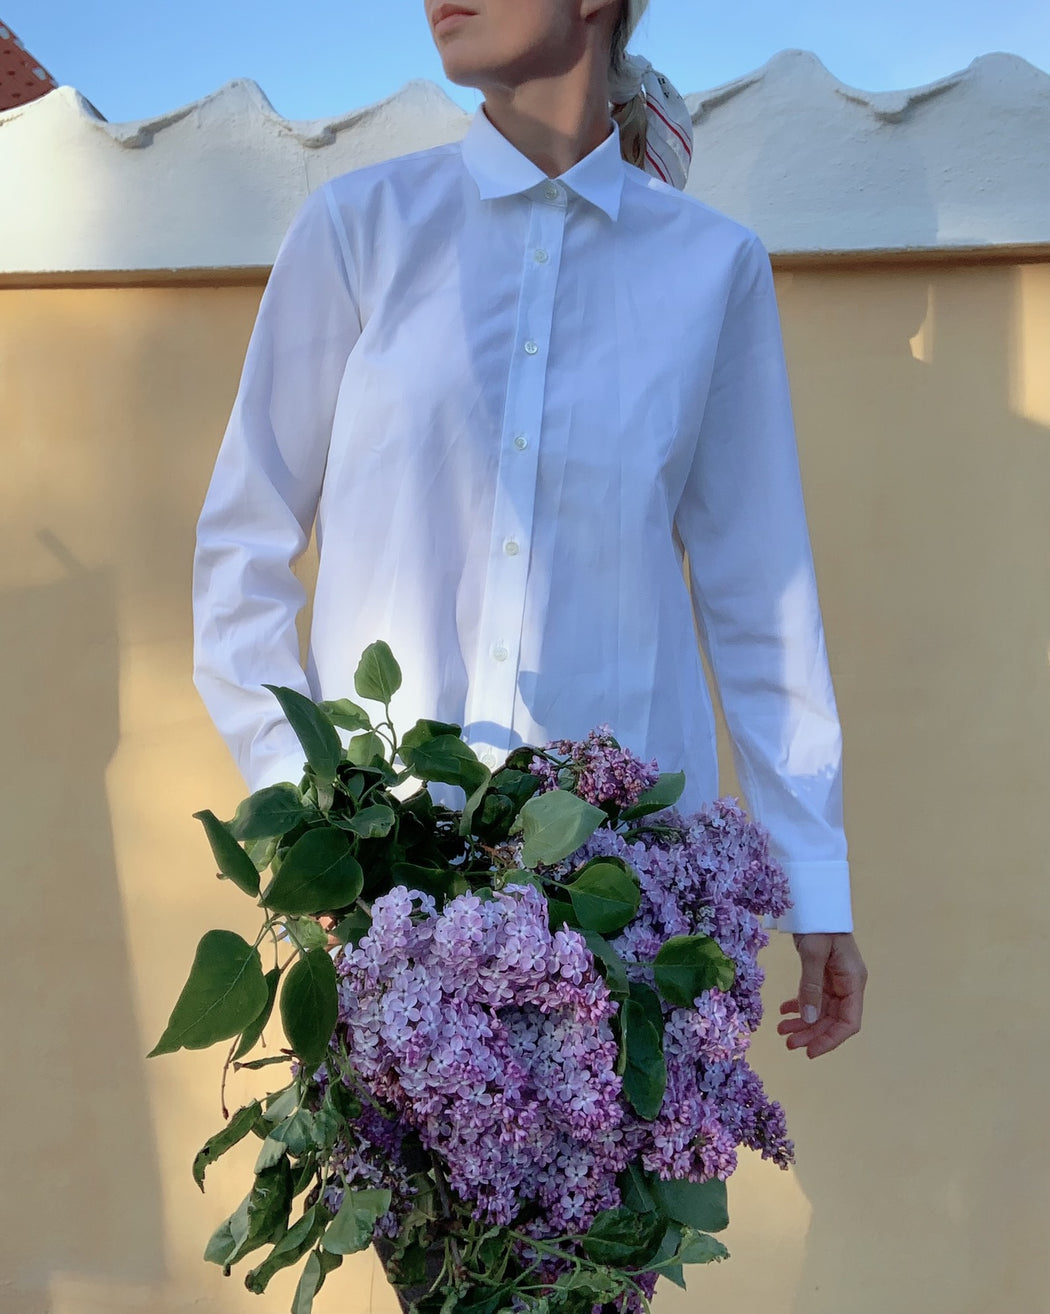 Model wearing white button down collar shirt, holding a bouquet of lilacs